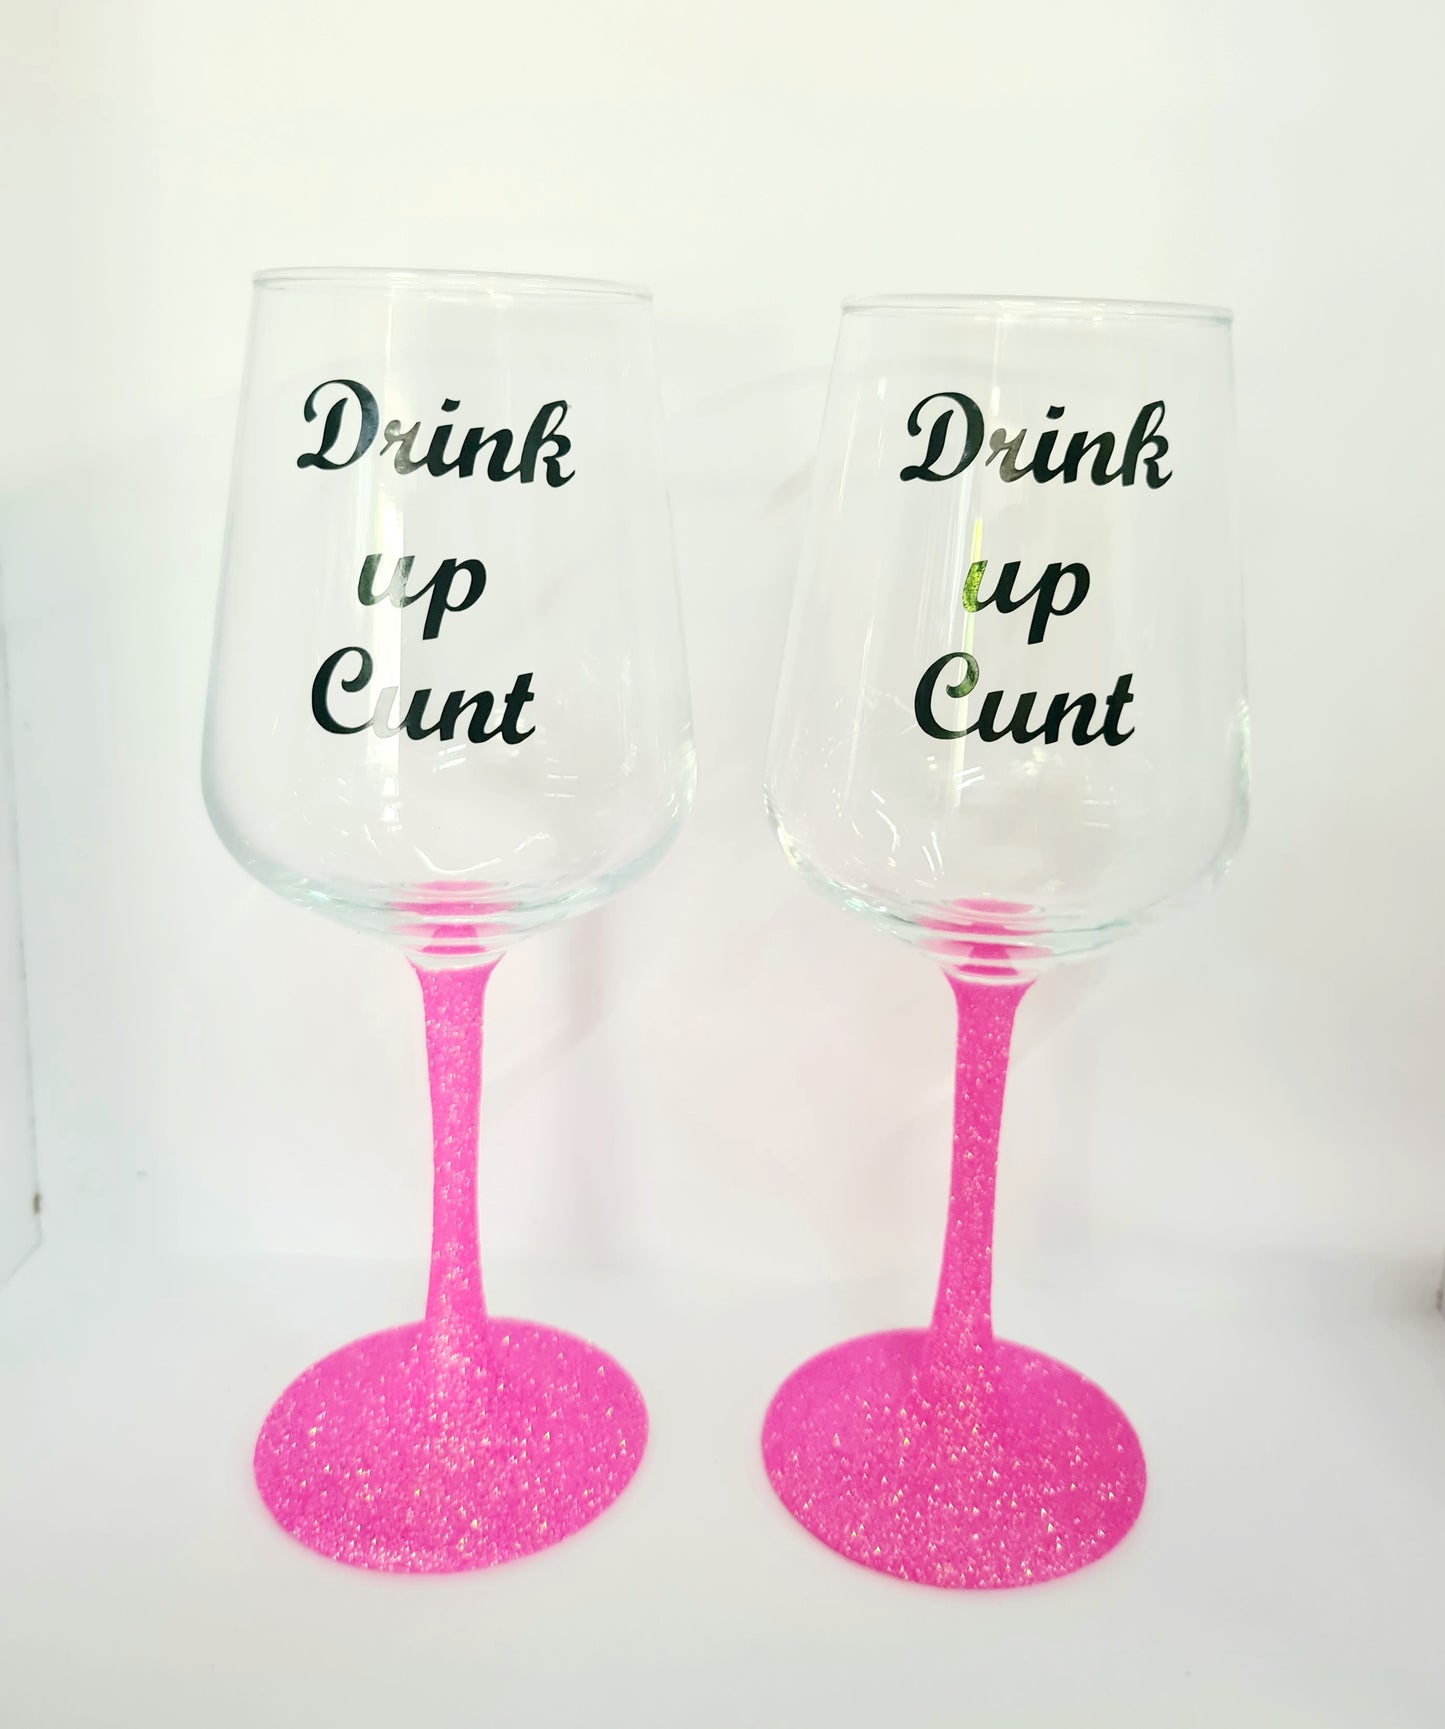 Drink up c*nt